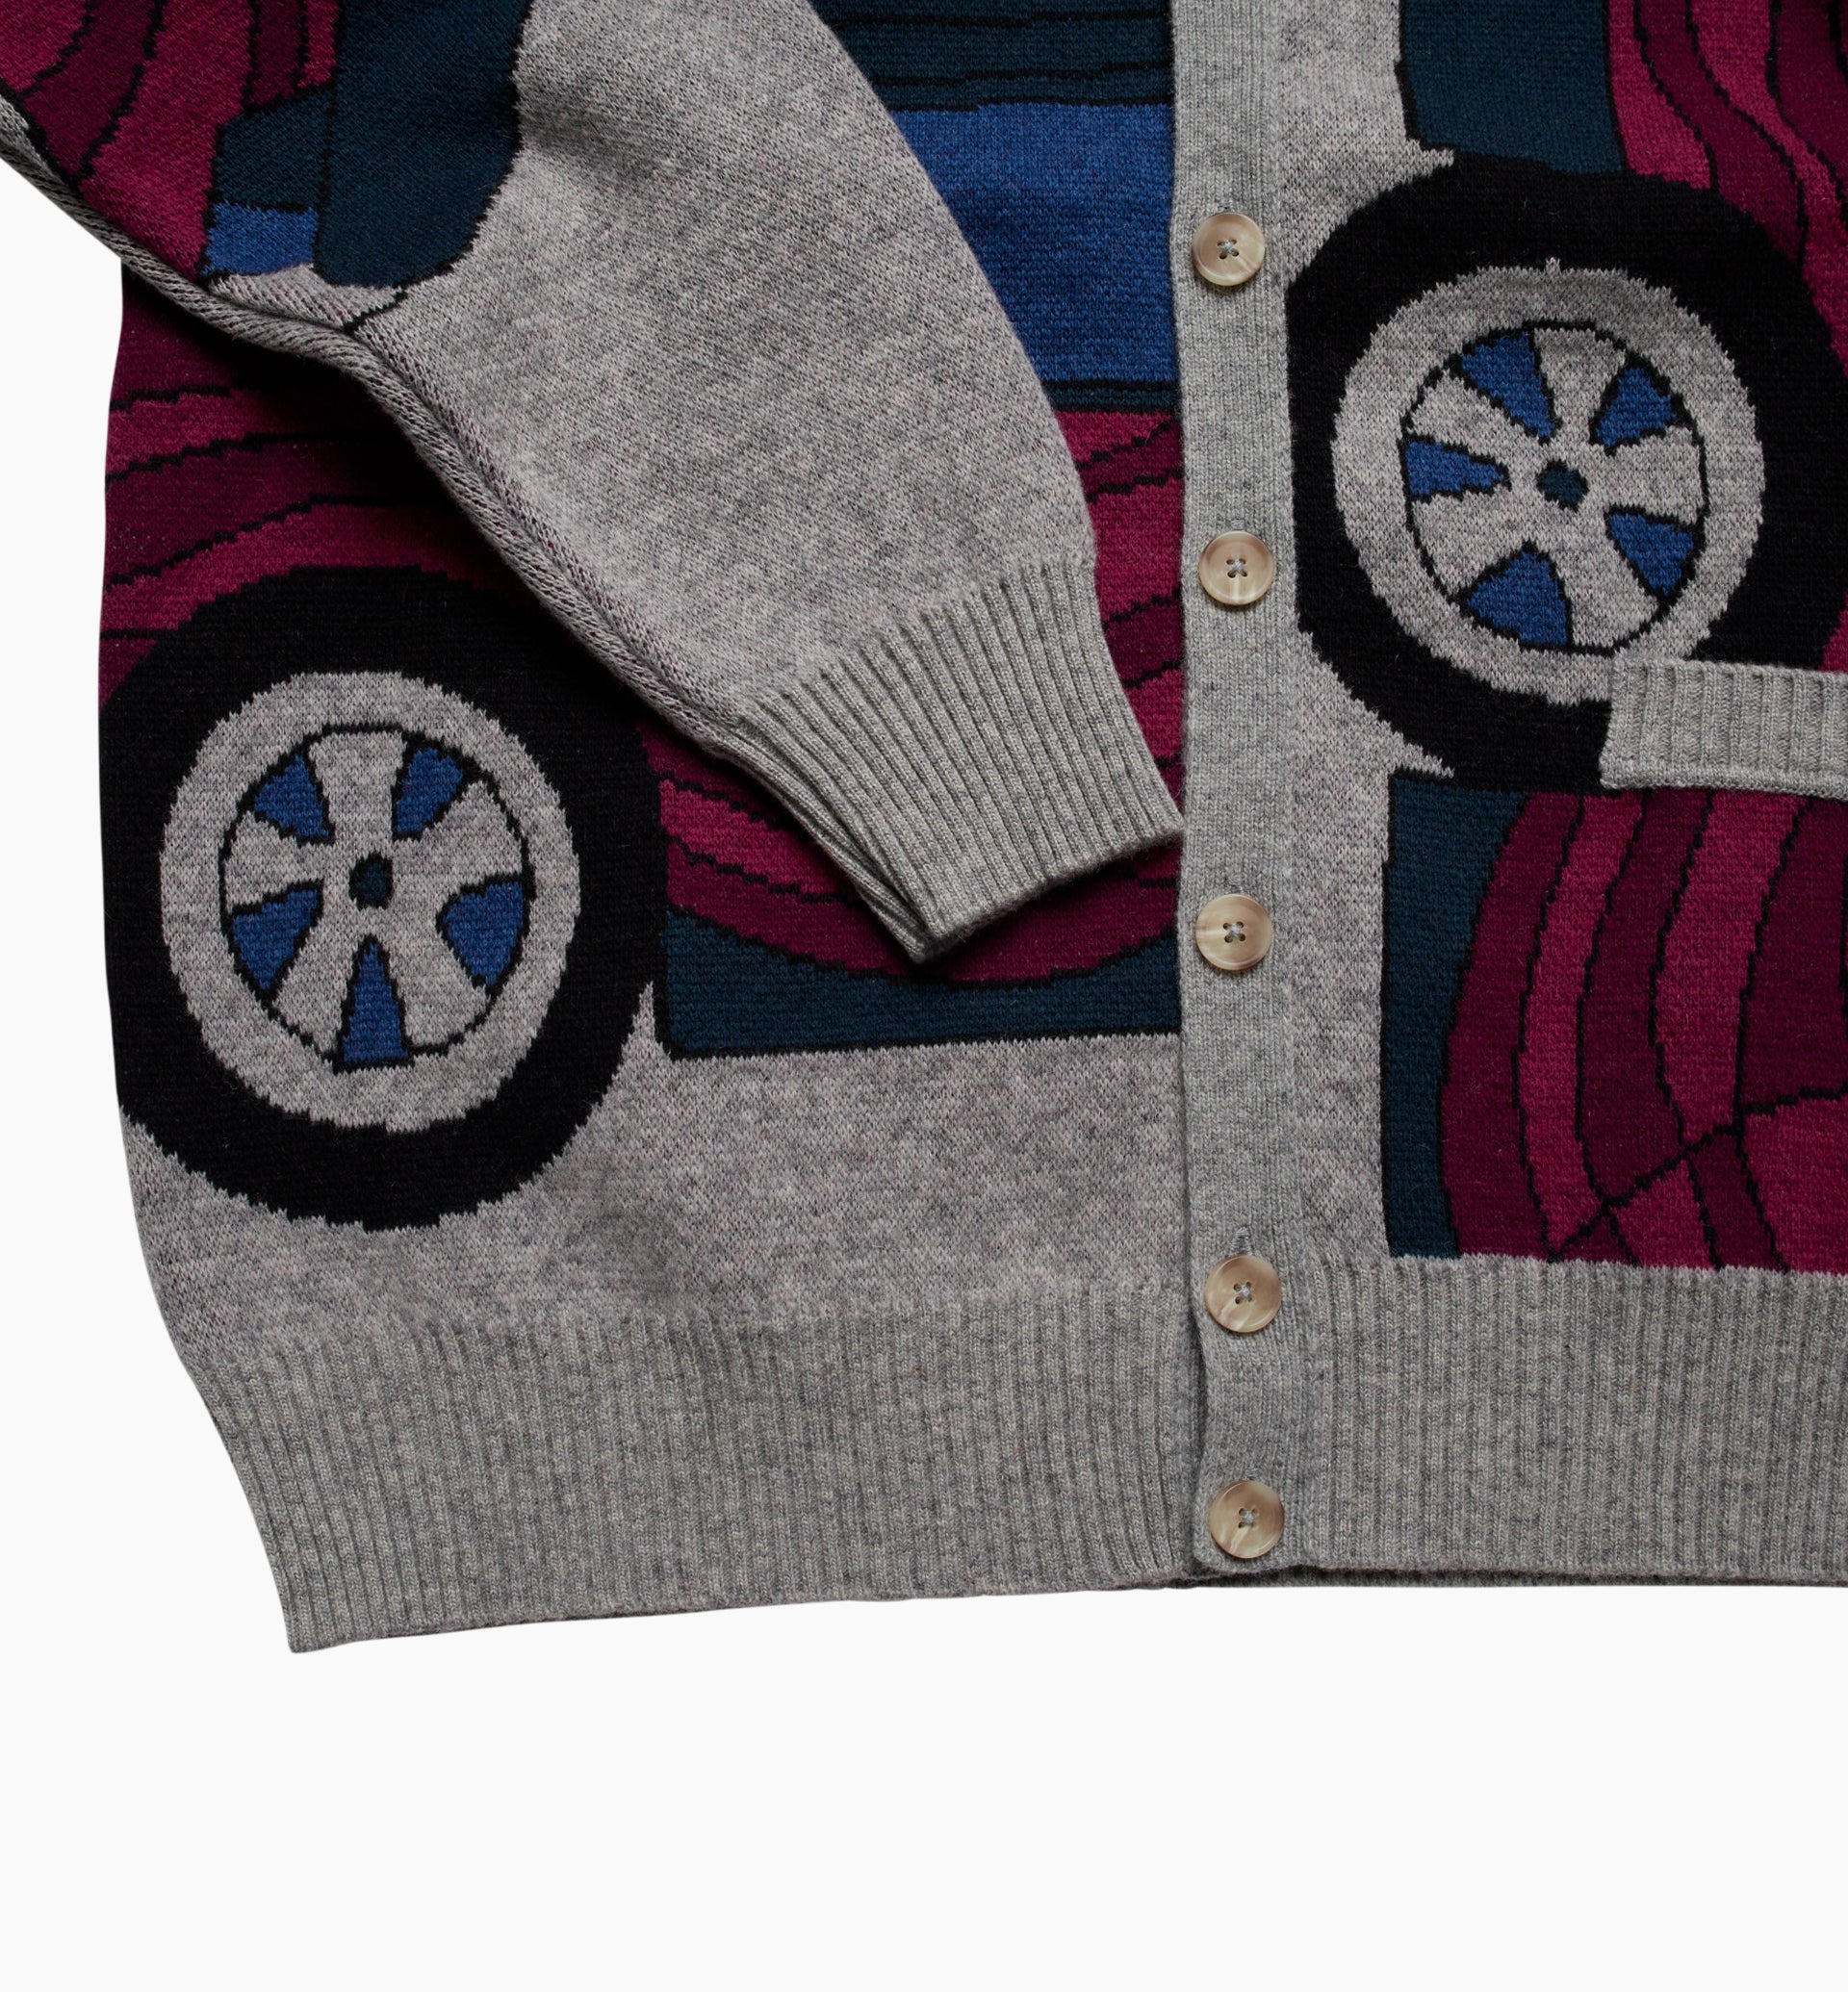 Parra - no parking knitted cardigan